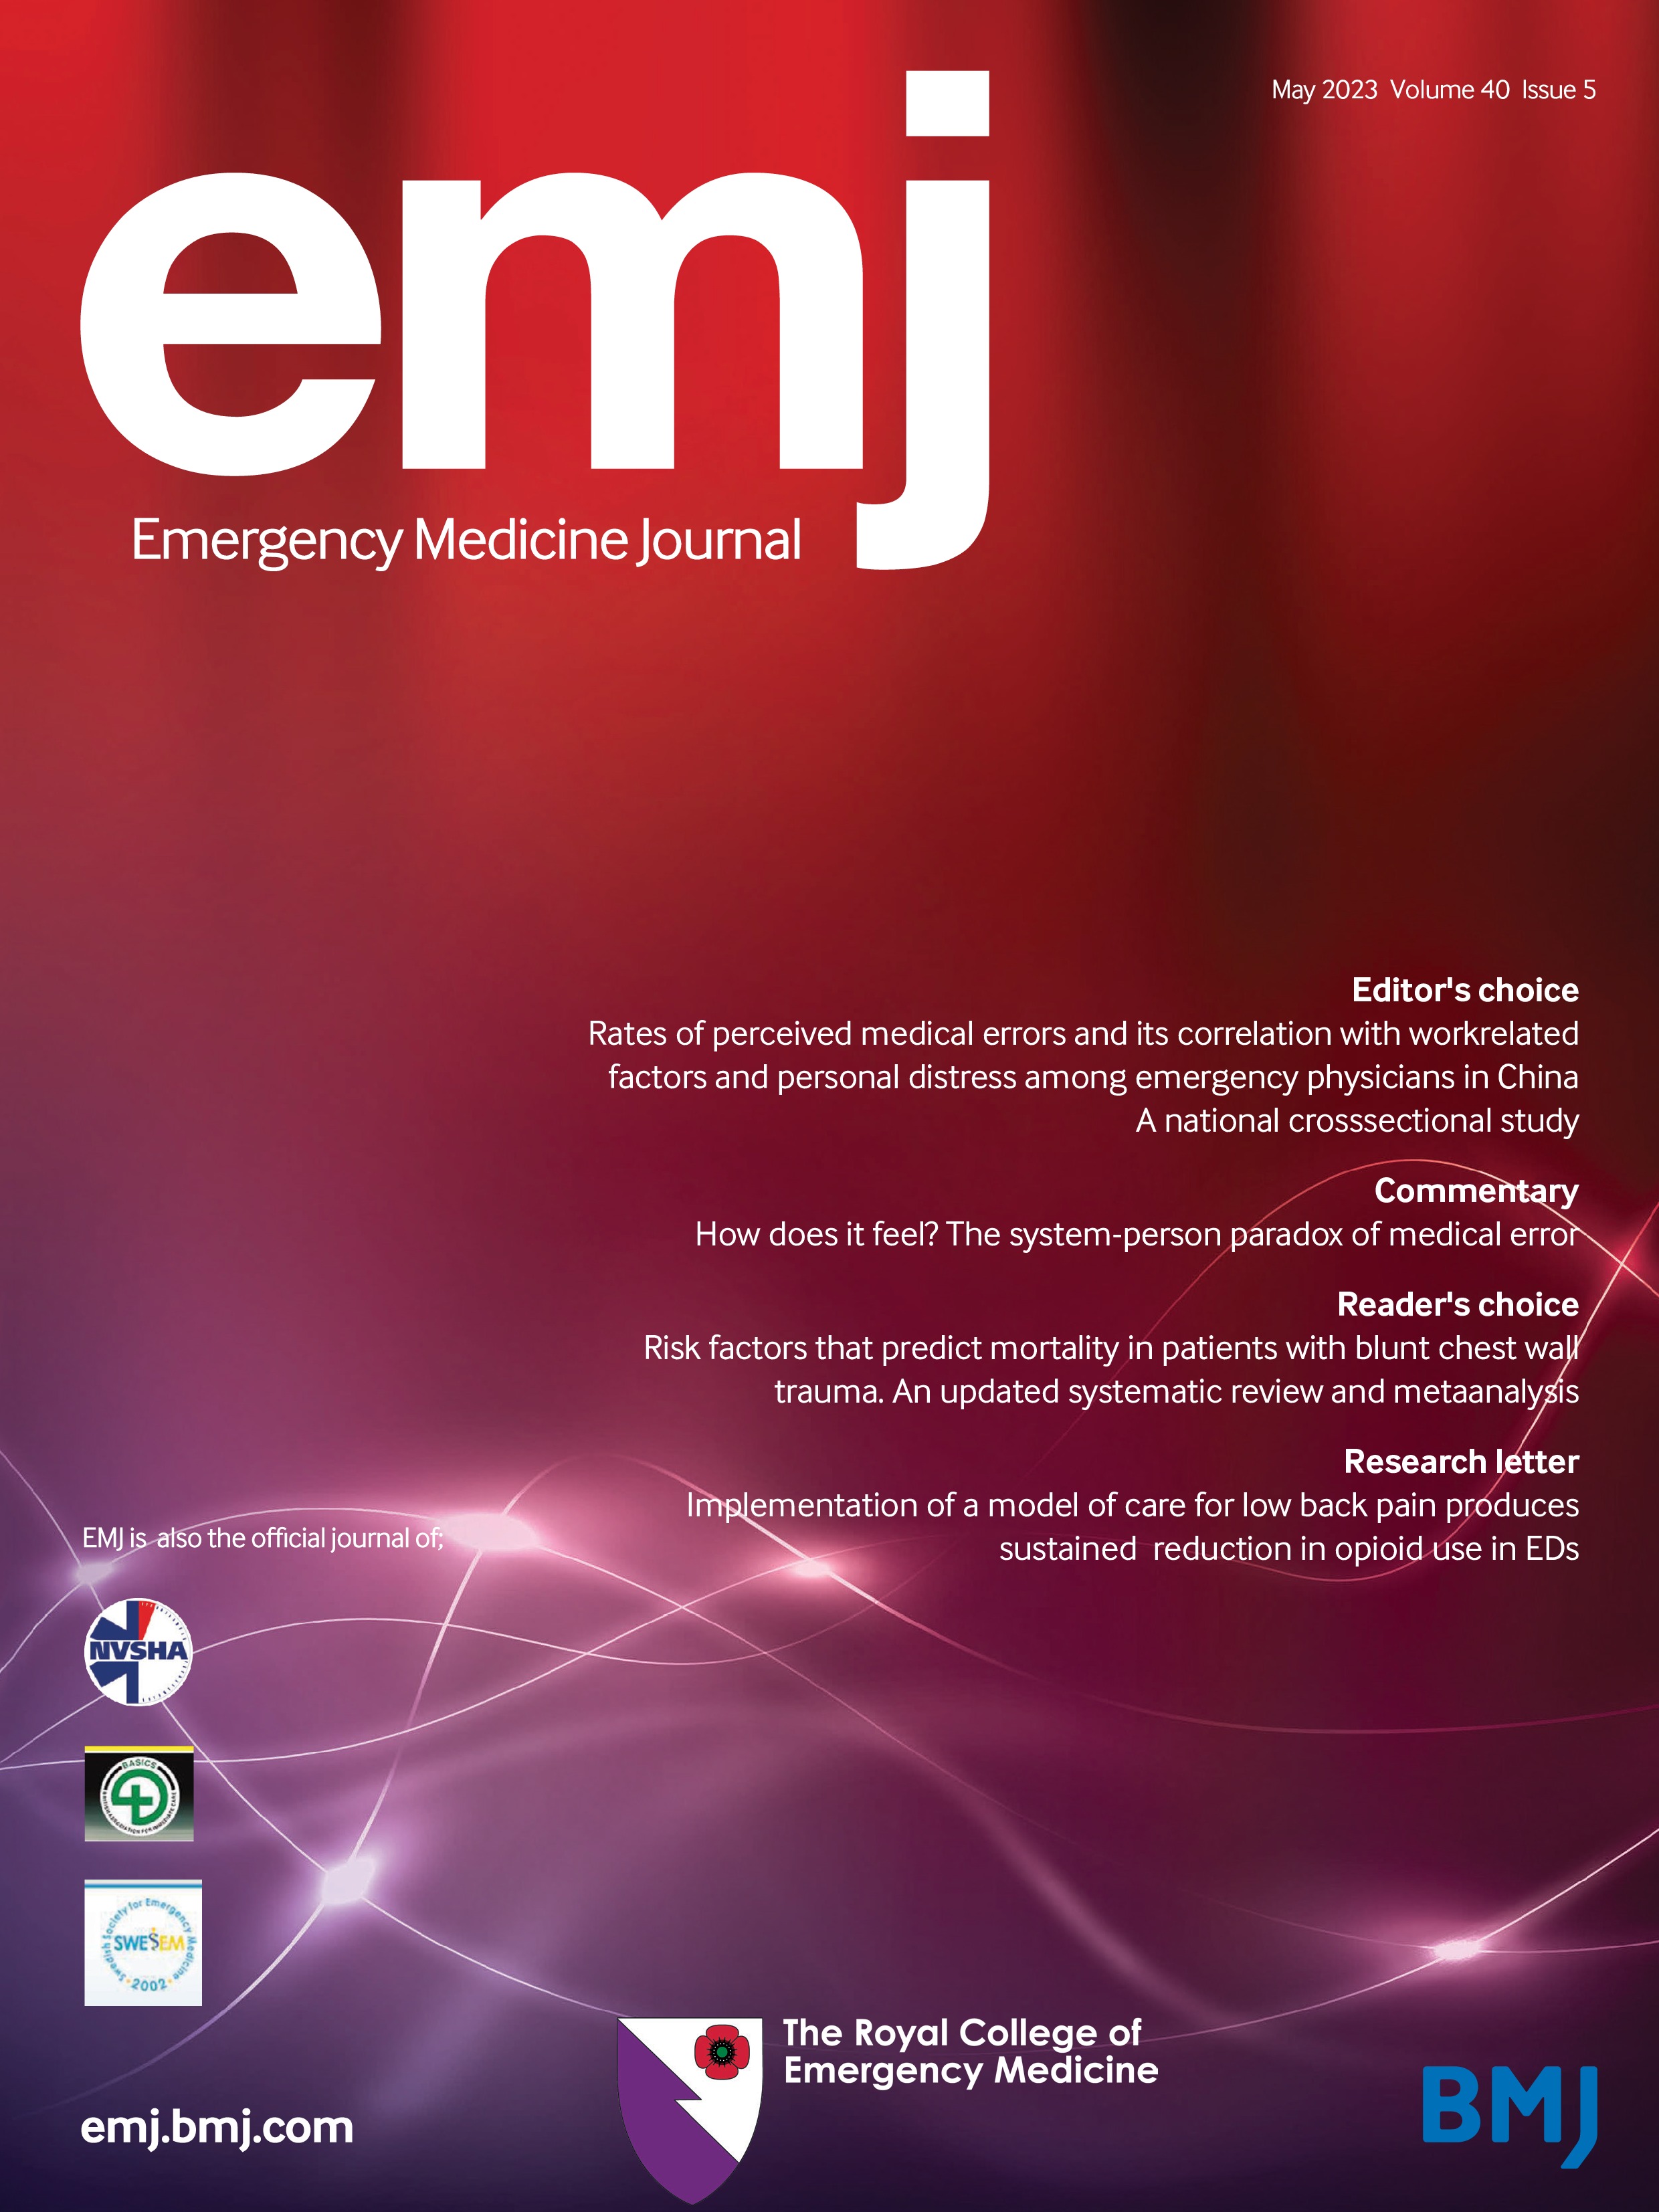 Emergency department visits and emergency-to-inpatient admissions for abnormal uterine bleeding in the USA nationwide